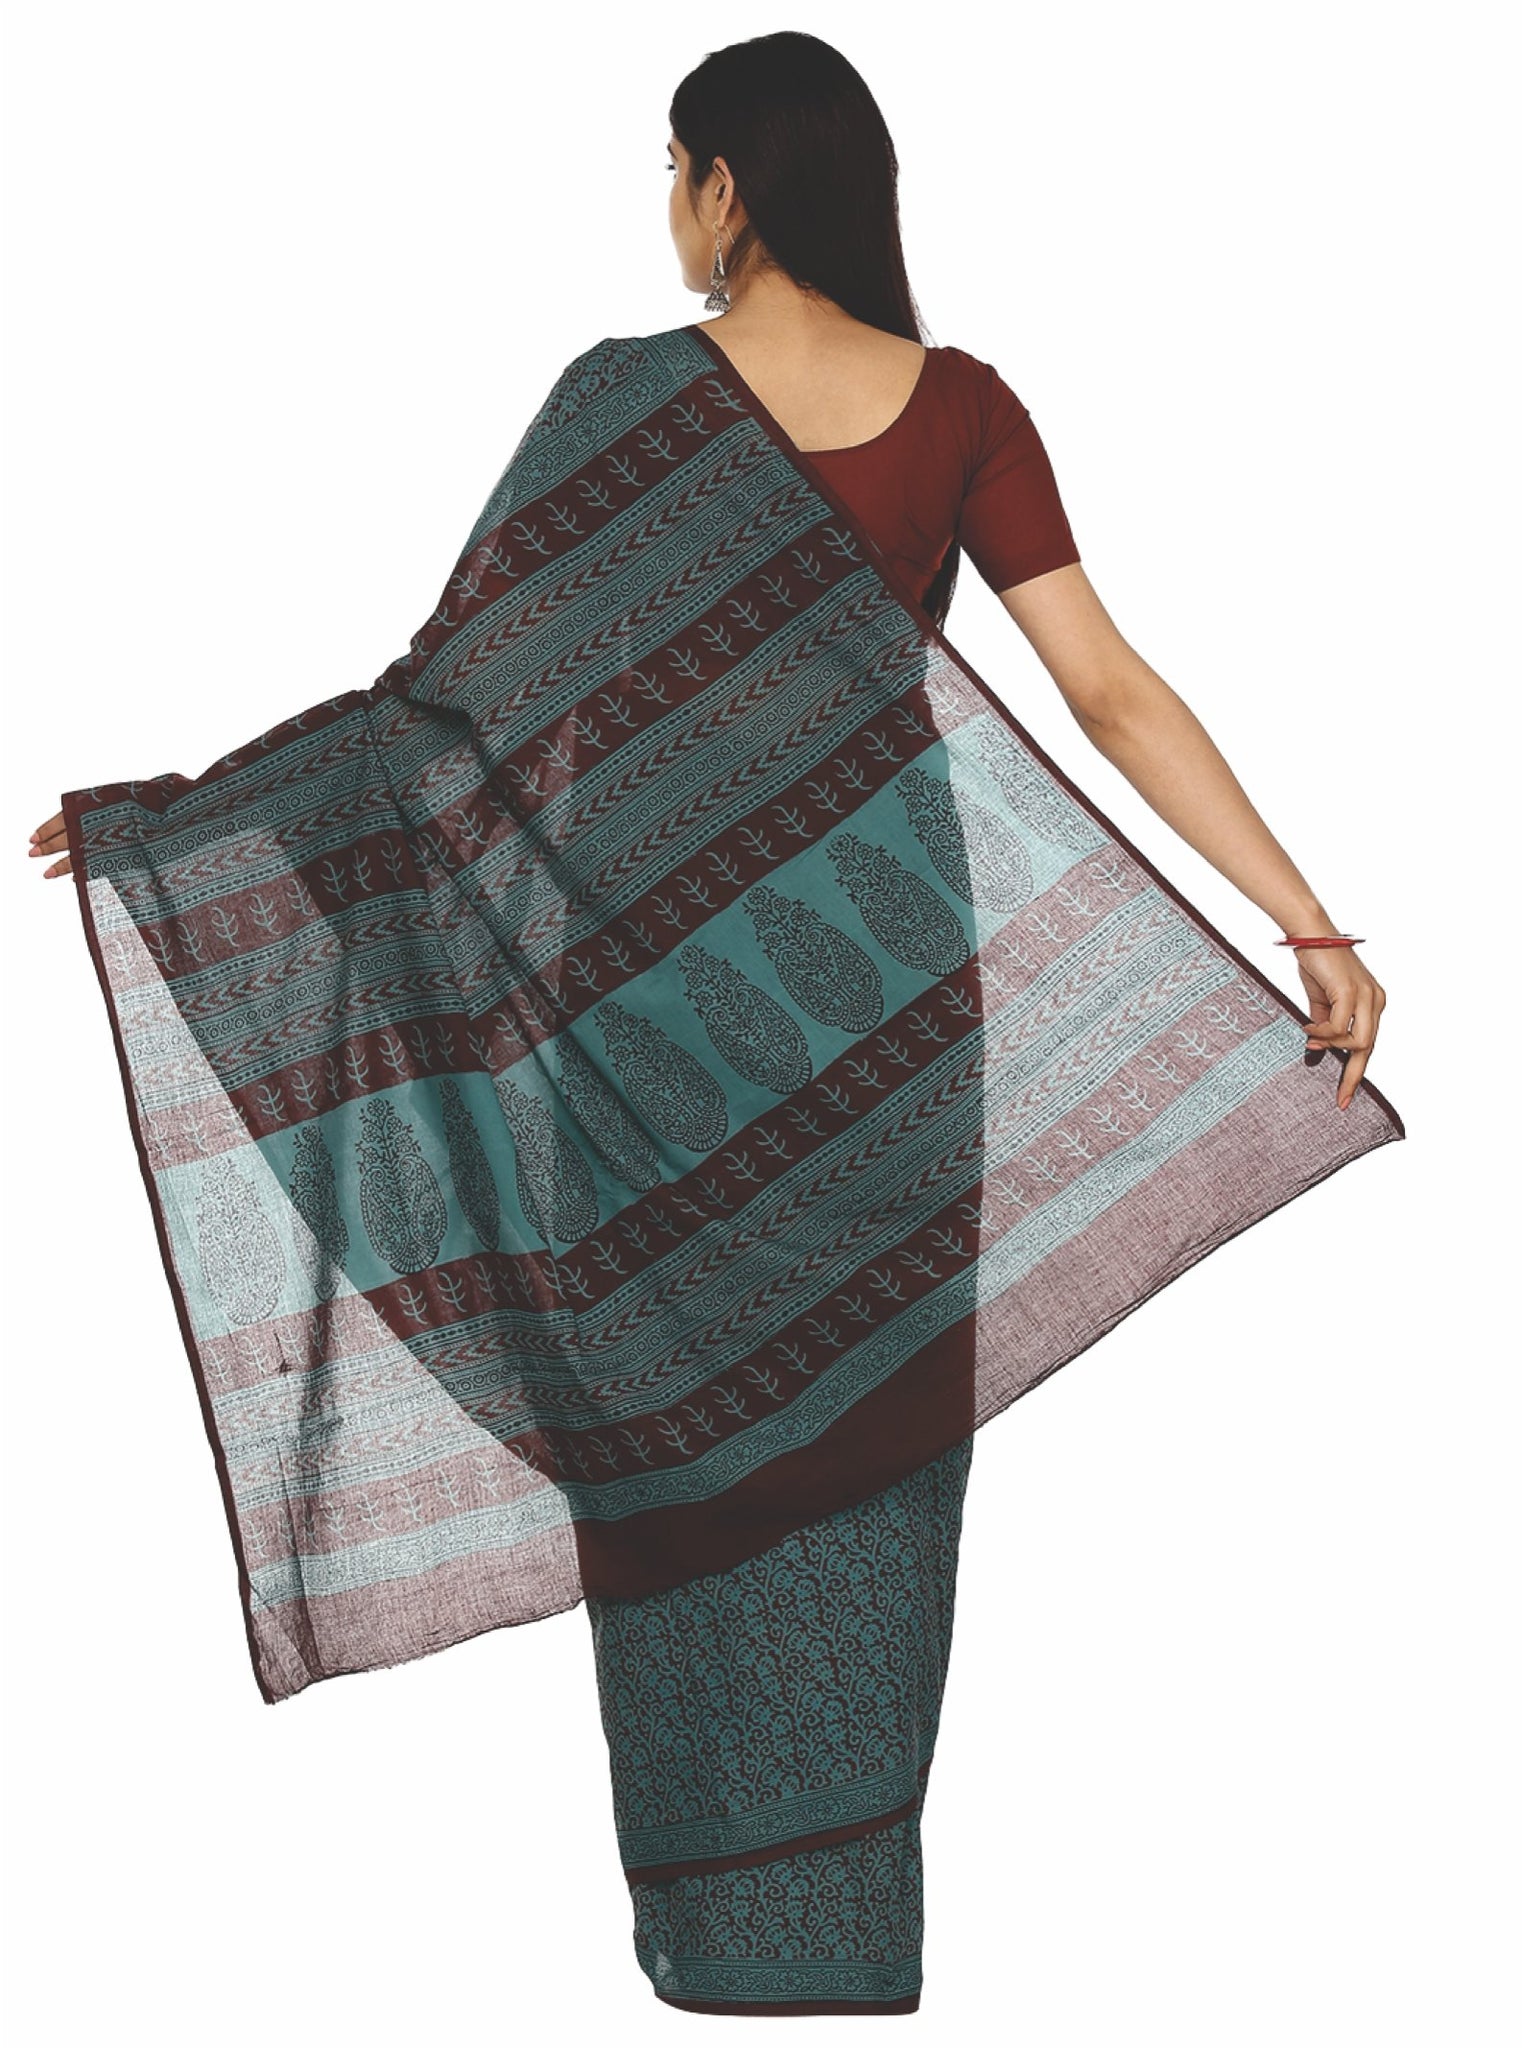 Kalakari India Teal Green Bagh Handblock Print Handcrafted Cotton Saree-Saree-Kalakari India-ZIBASA0020-Bagh, Cotton, Geographical Indication, Hand Blocks, Hand Crafted, Heritage Prints, Natural Dyes, Sarees, Sustainable Fabrics-[Linen,Ethnic,wear,Fashionista,Handloom,Handicraft,Indigo,blockprint,block,print,Cotton,Chanderi,Blue, latest,classy,party,bollywood,trendy,summer,style,traditional,formal,elegant,unique,style,hand,block,print, dabu,booti,gift,present,glamorous,affordable,collectible,Sar